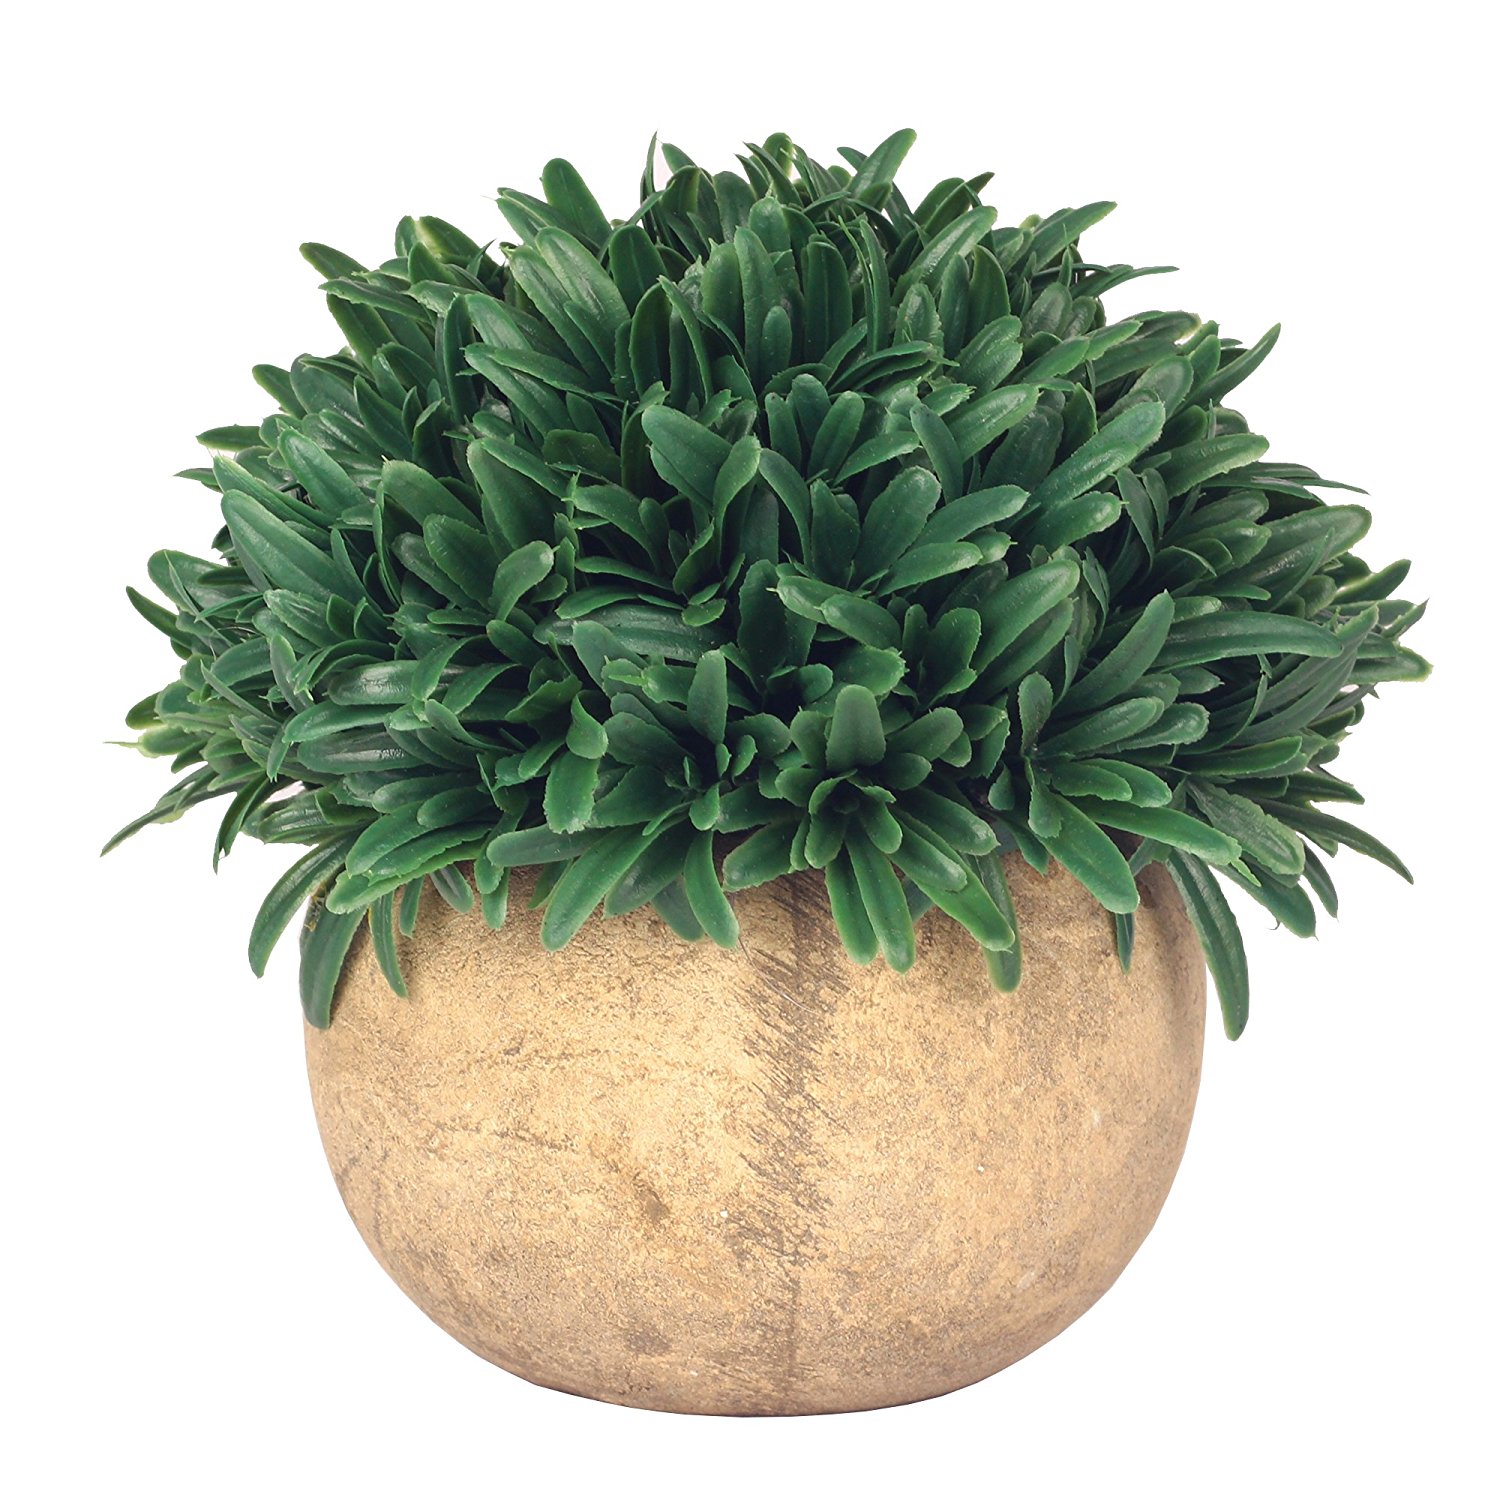 Amazon.com: Artificial Plant for Home Decor Grass Lovely Fake Plants ...